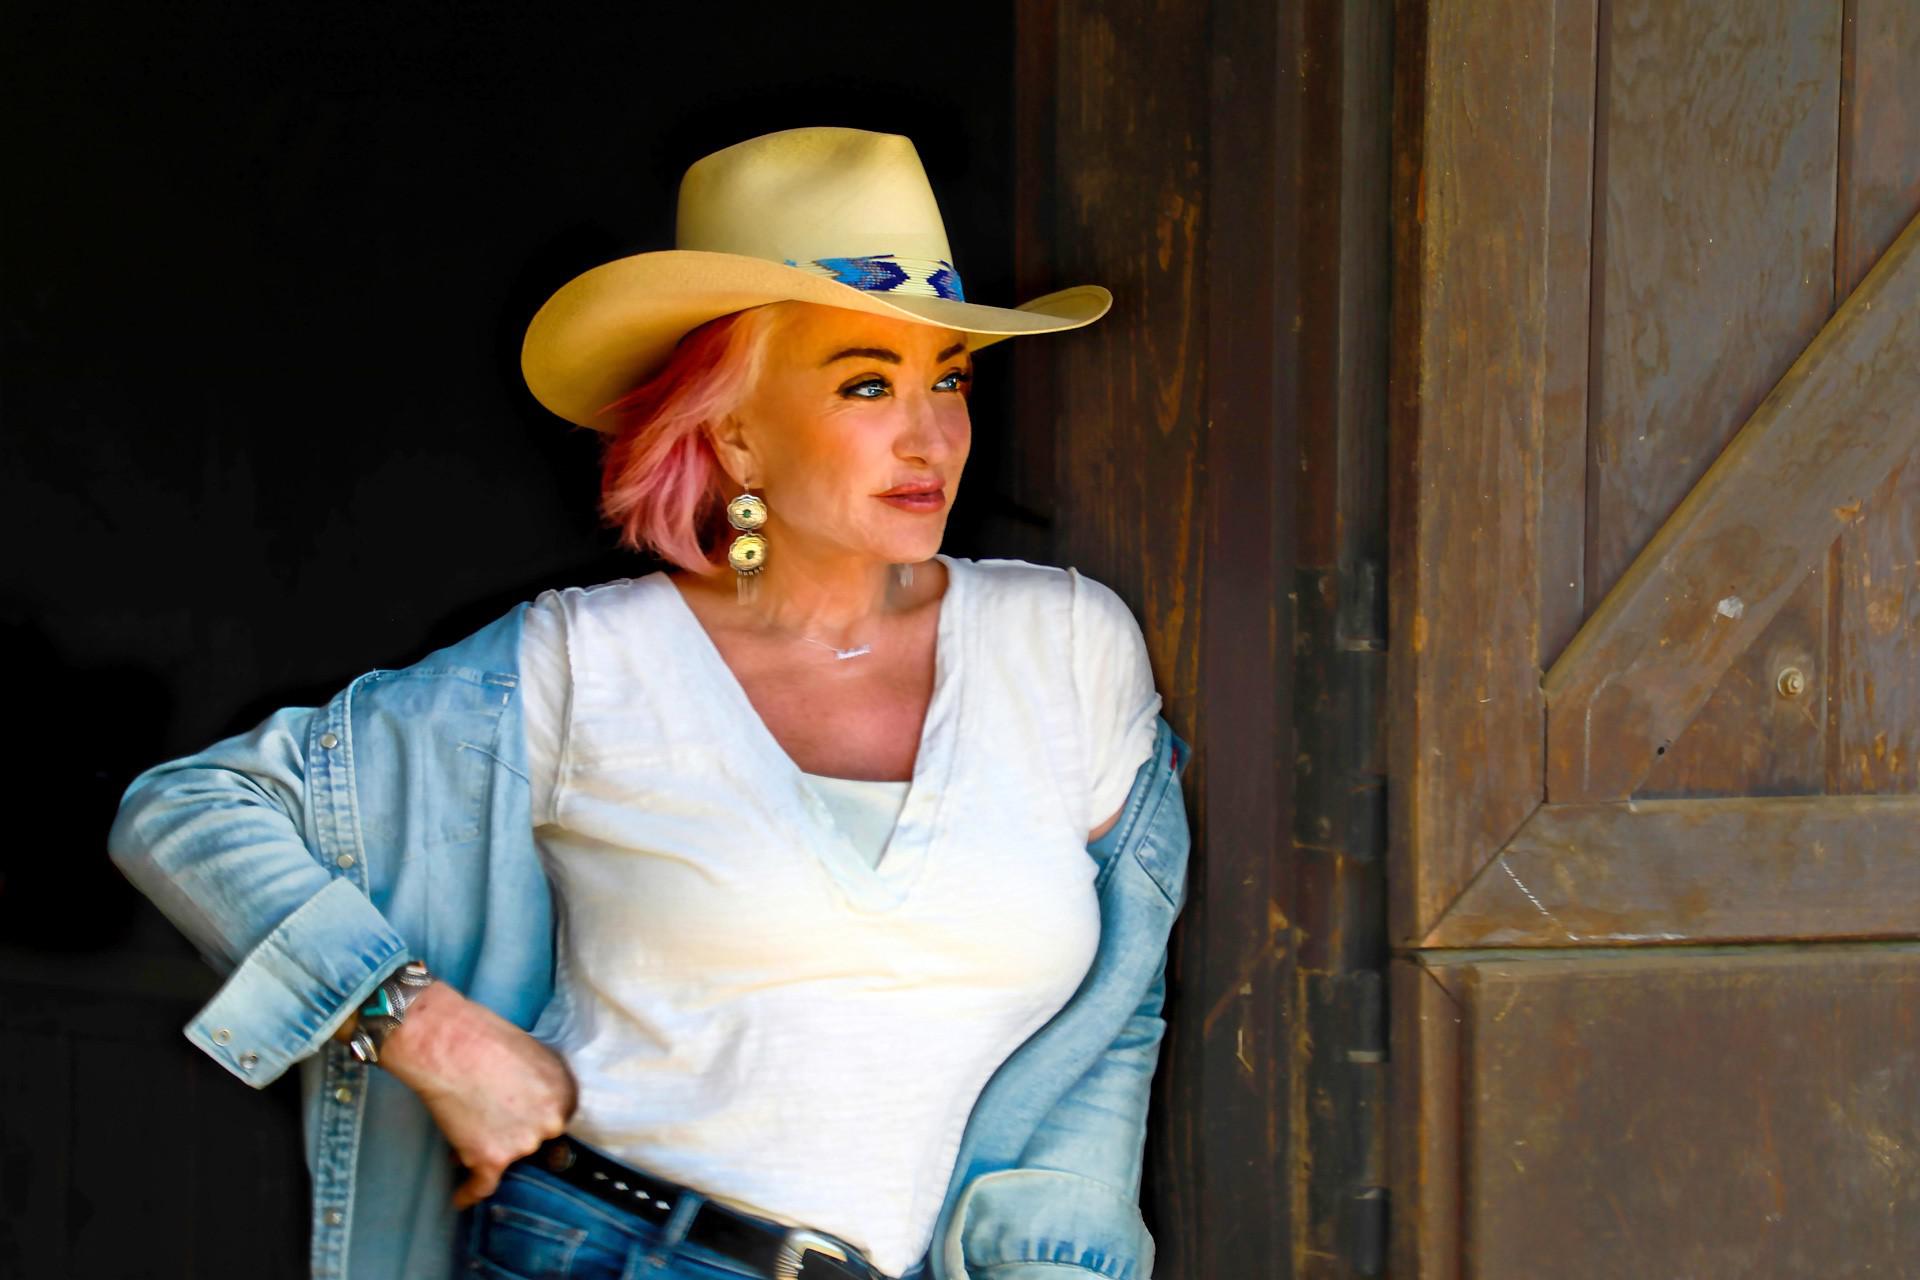 Concert Connection: See country music star Tanya Tucker in concert, Aug. 